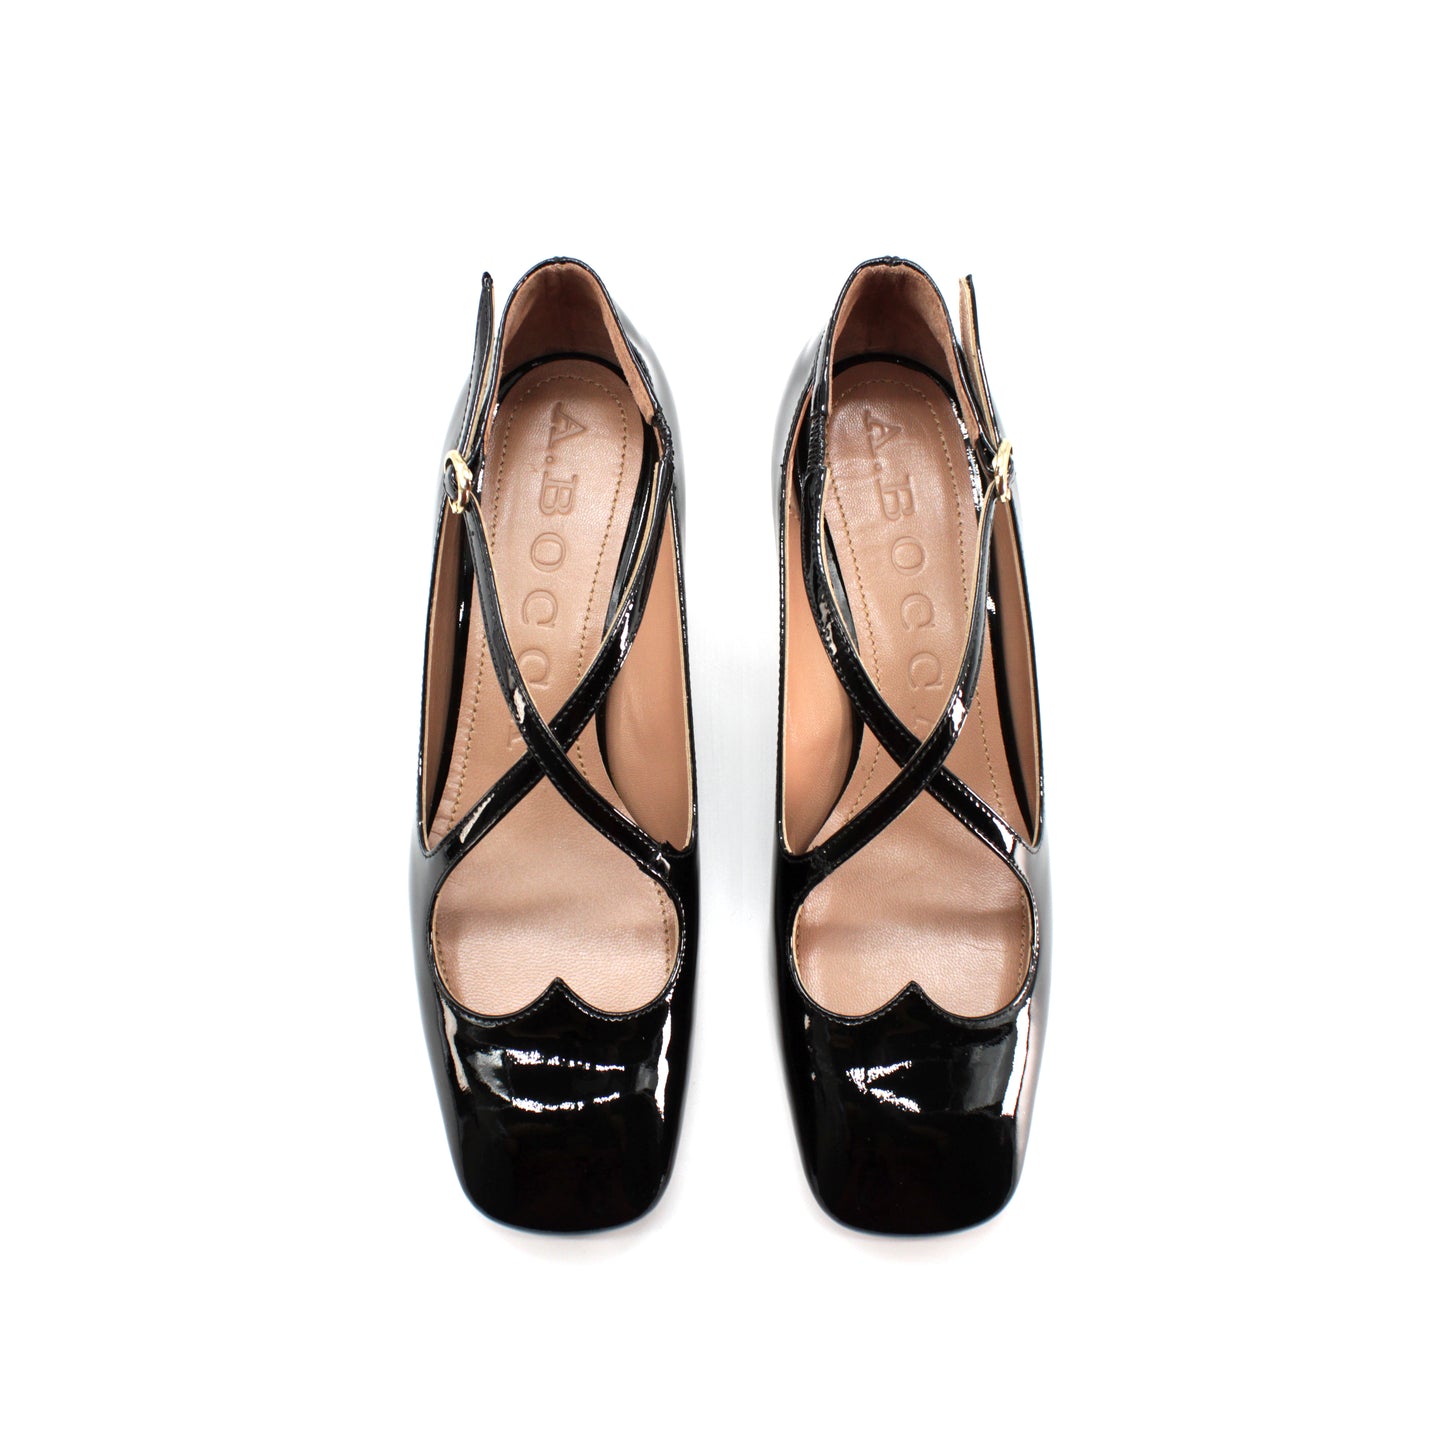 Two for Love "kitten heel" in black patent leather